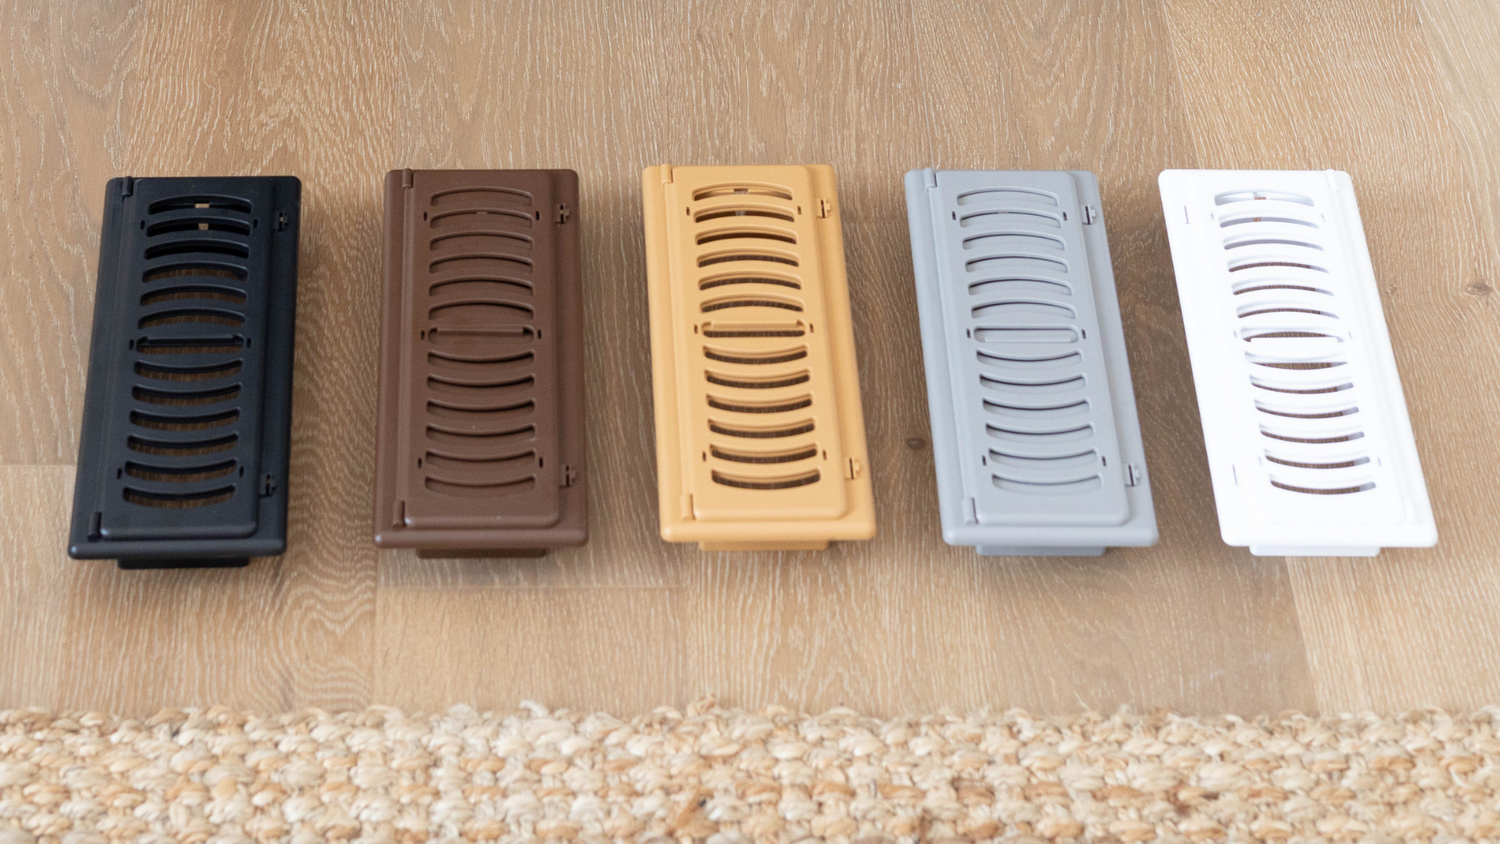 Five childproof vent covers lined up showing different colours: black, brown, tan, grey, white